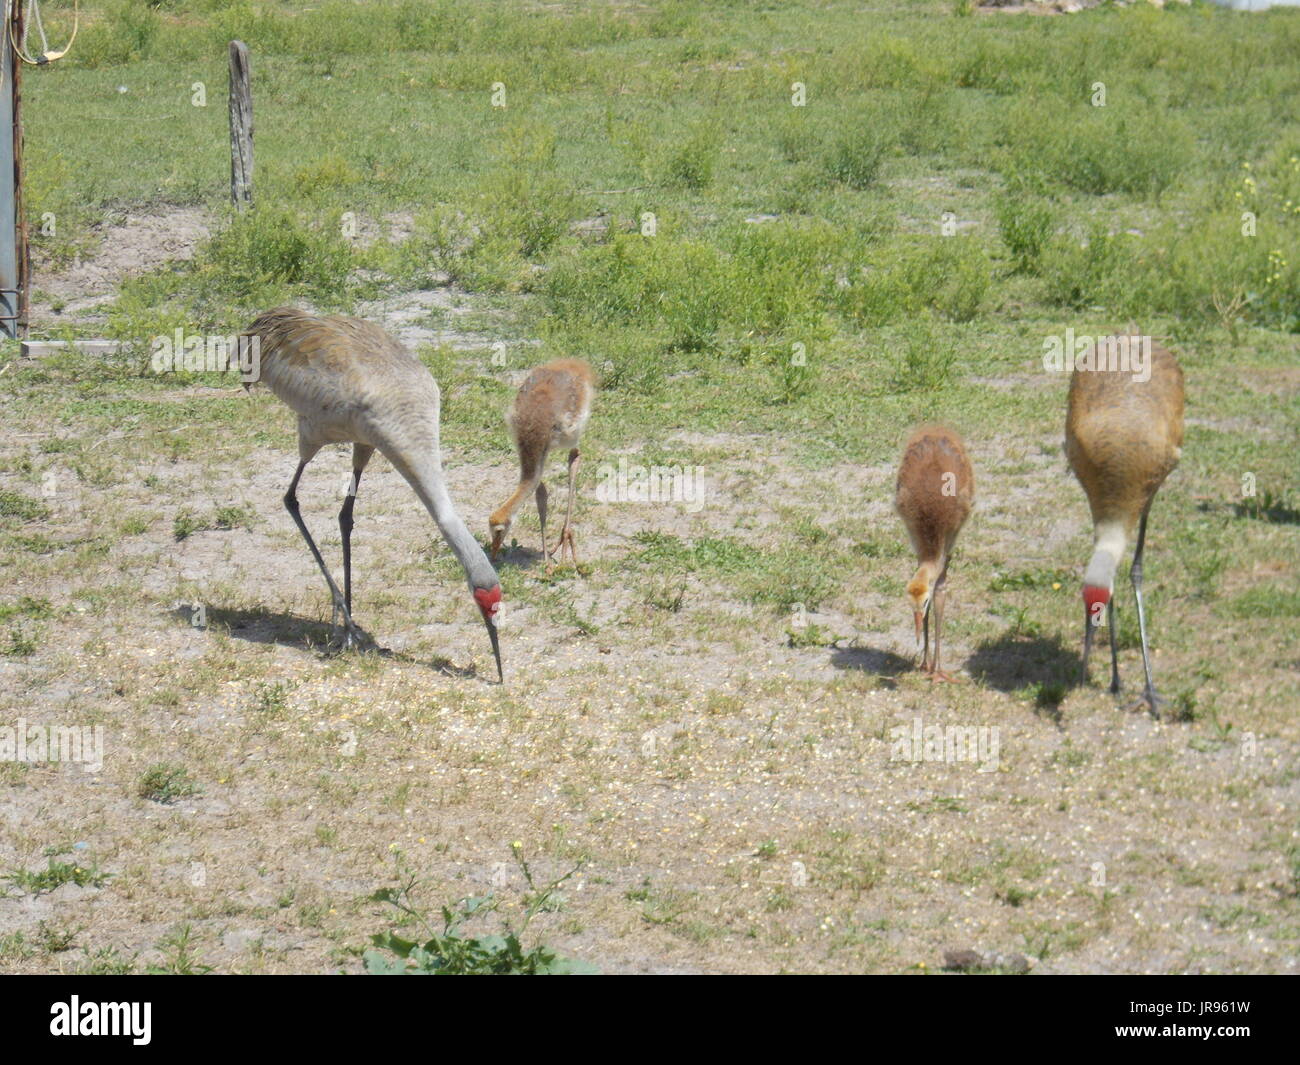 A pair of Sandhill Cranes and two babies. Stock Photo